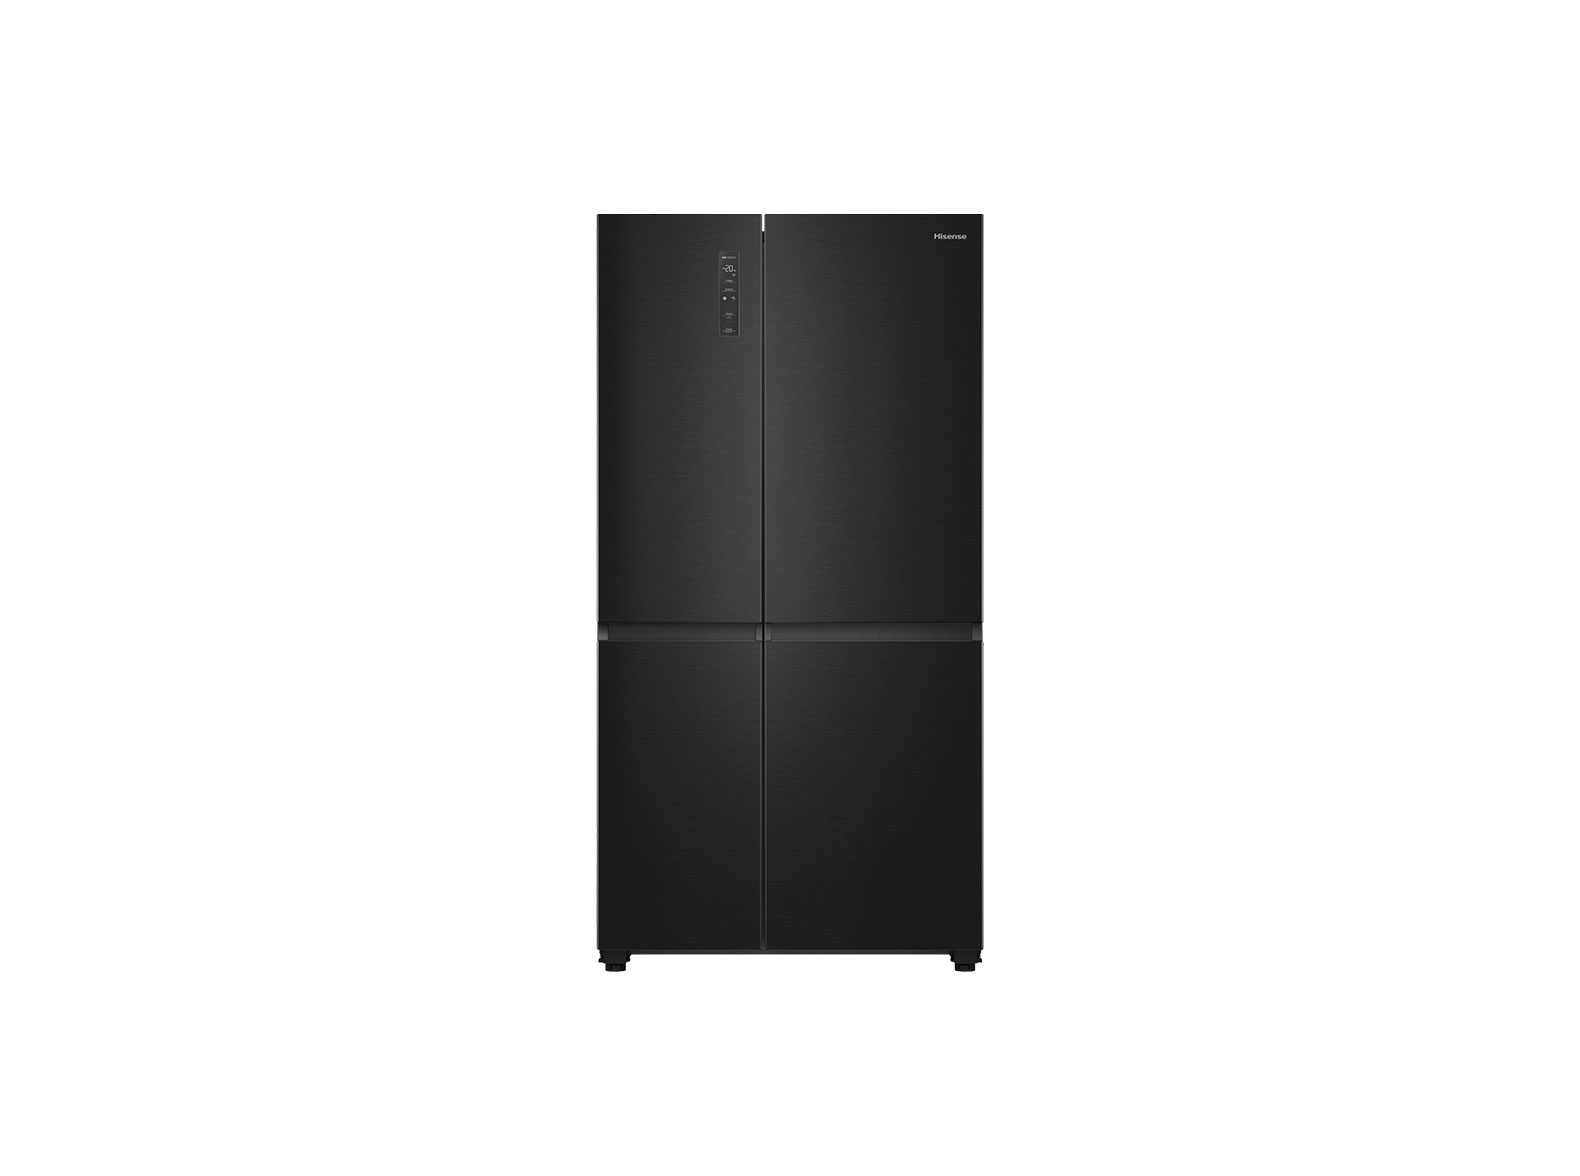 PureFlat 5.5 Star Rated Side-by-Side 652L